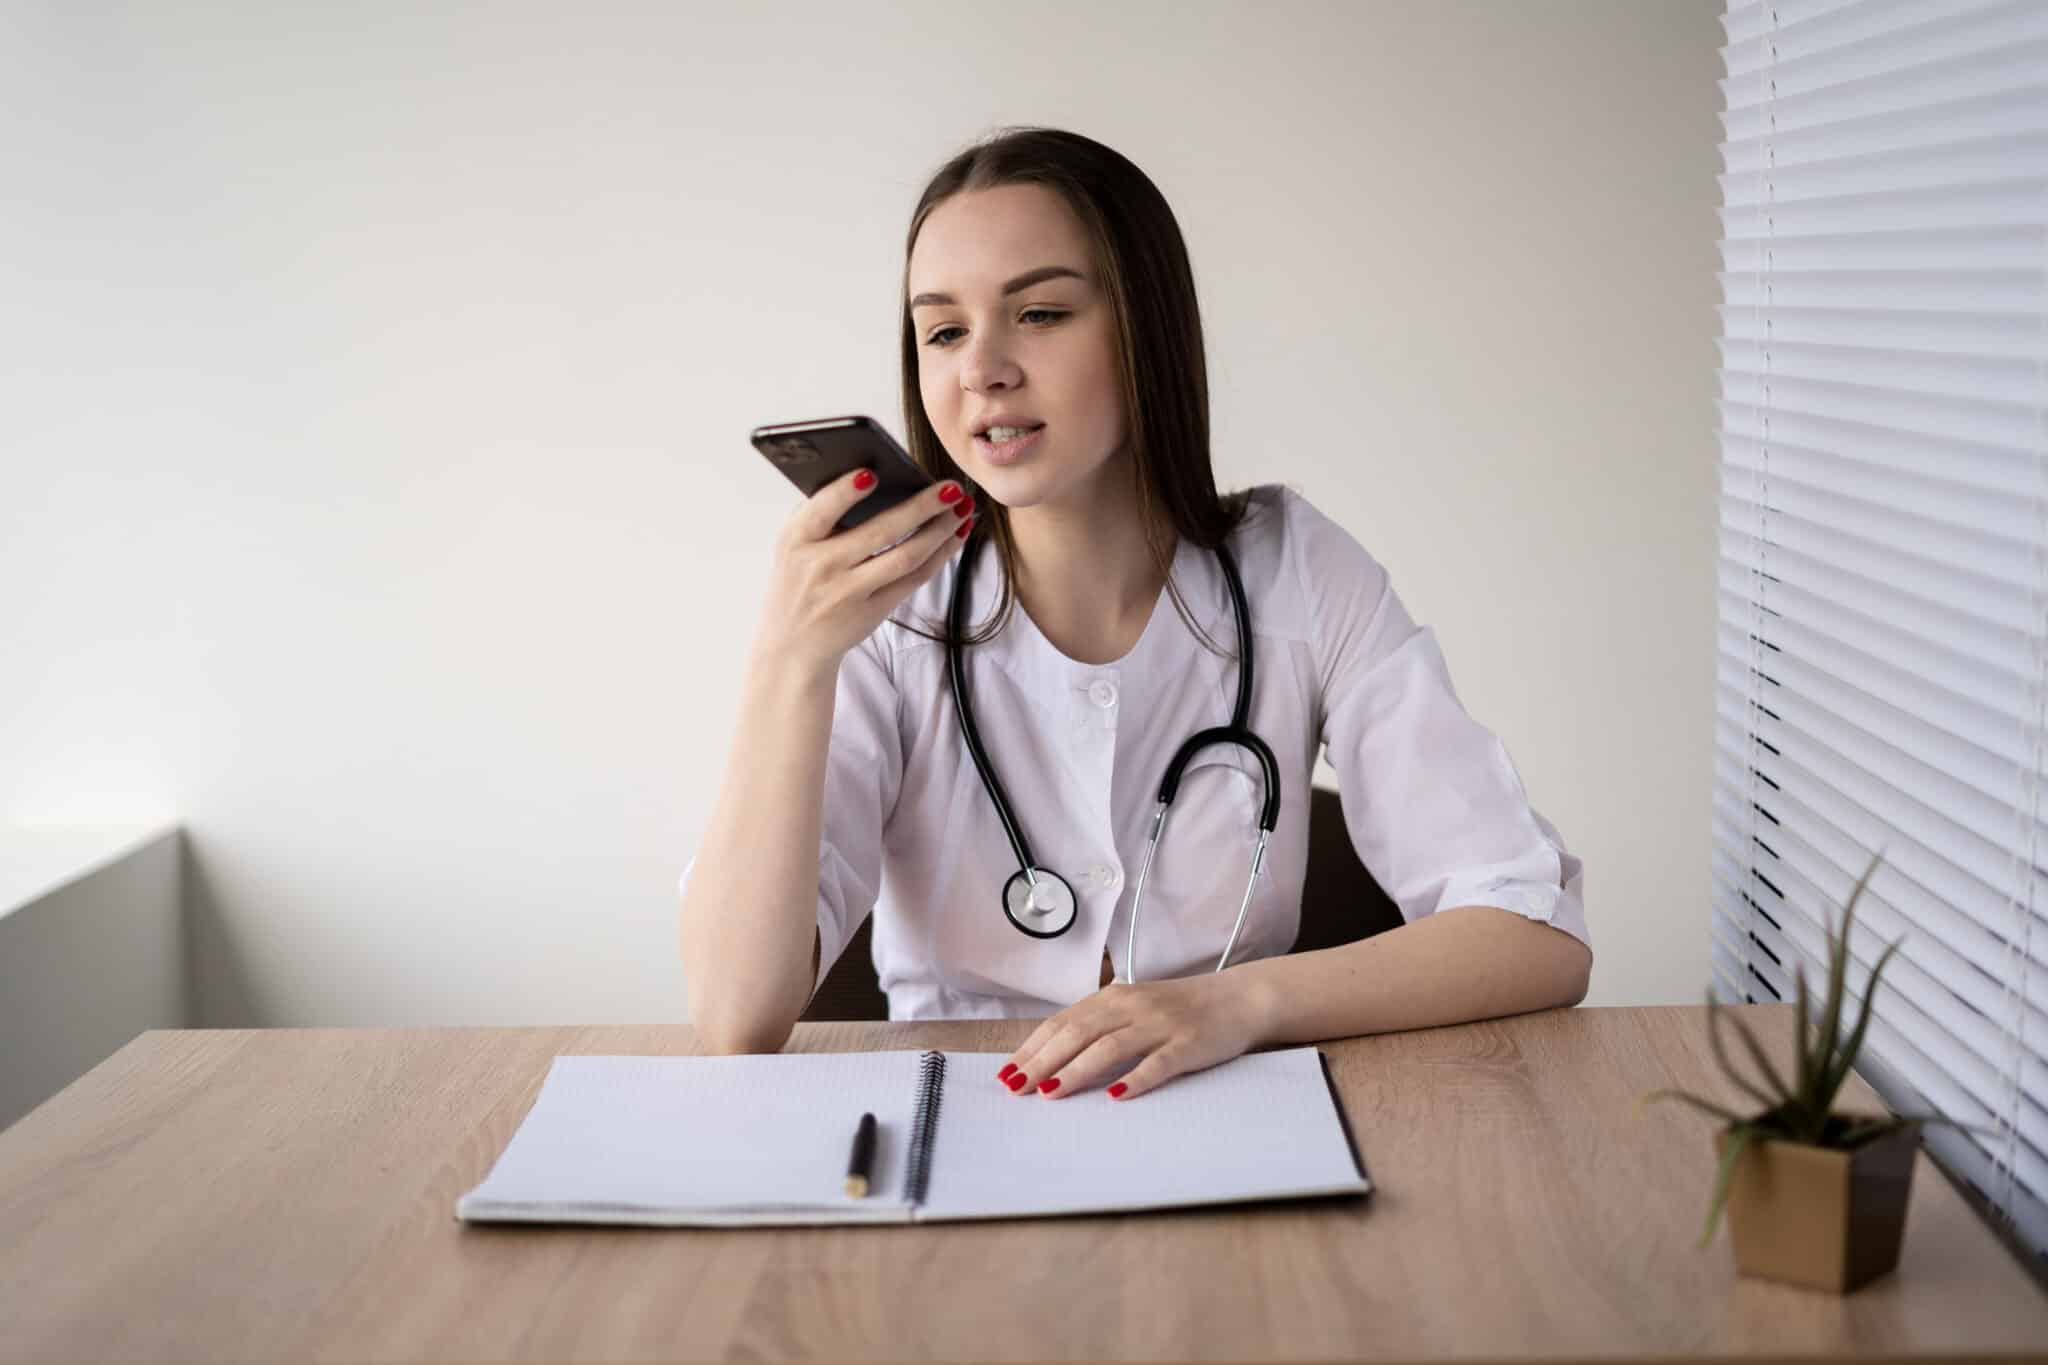 Physician using a mobile device to dictate medical notes in a quiet room for clinical documentation.